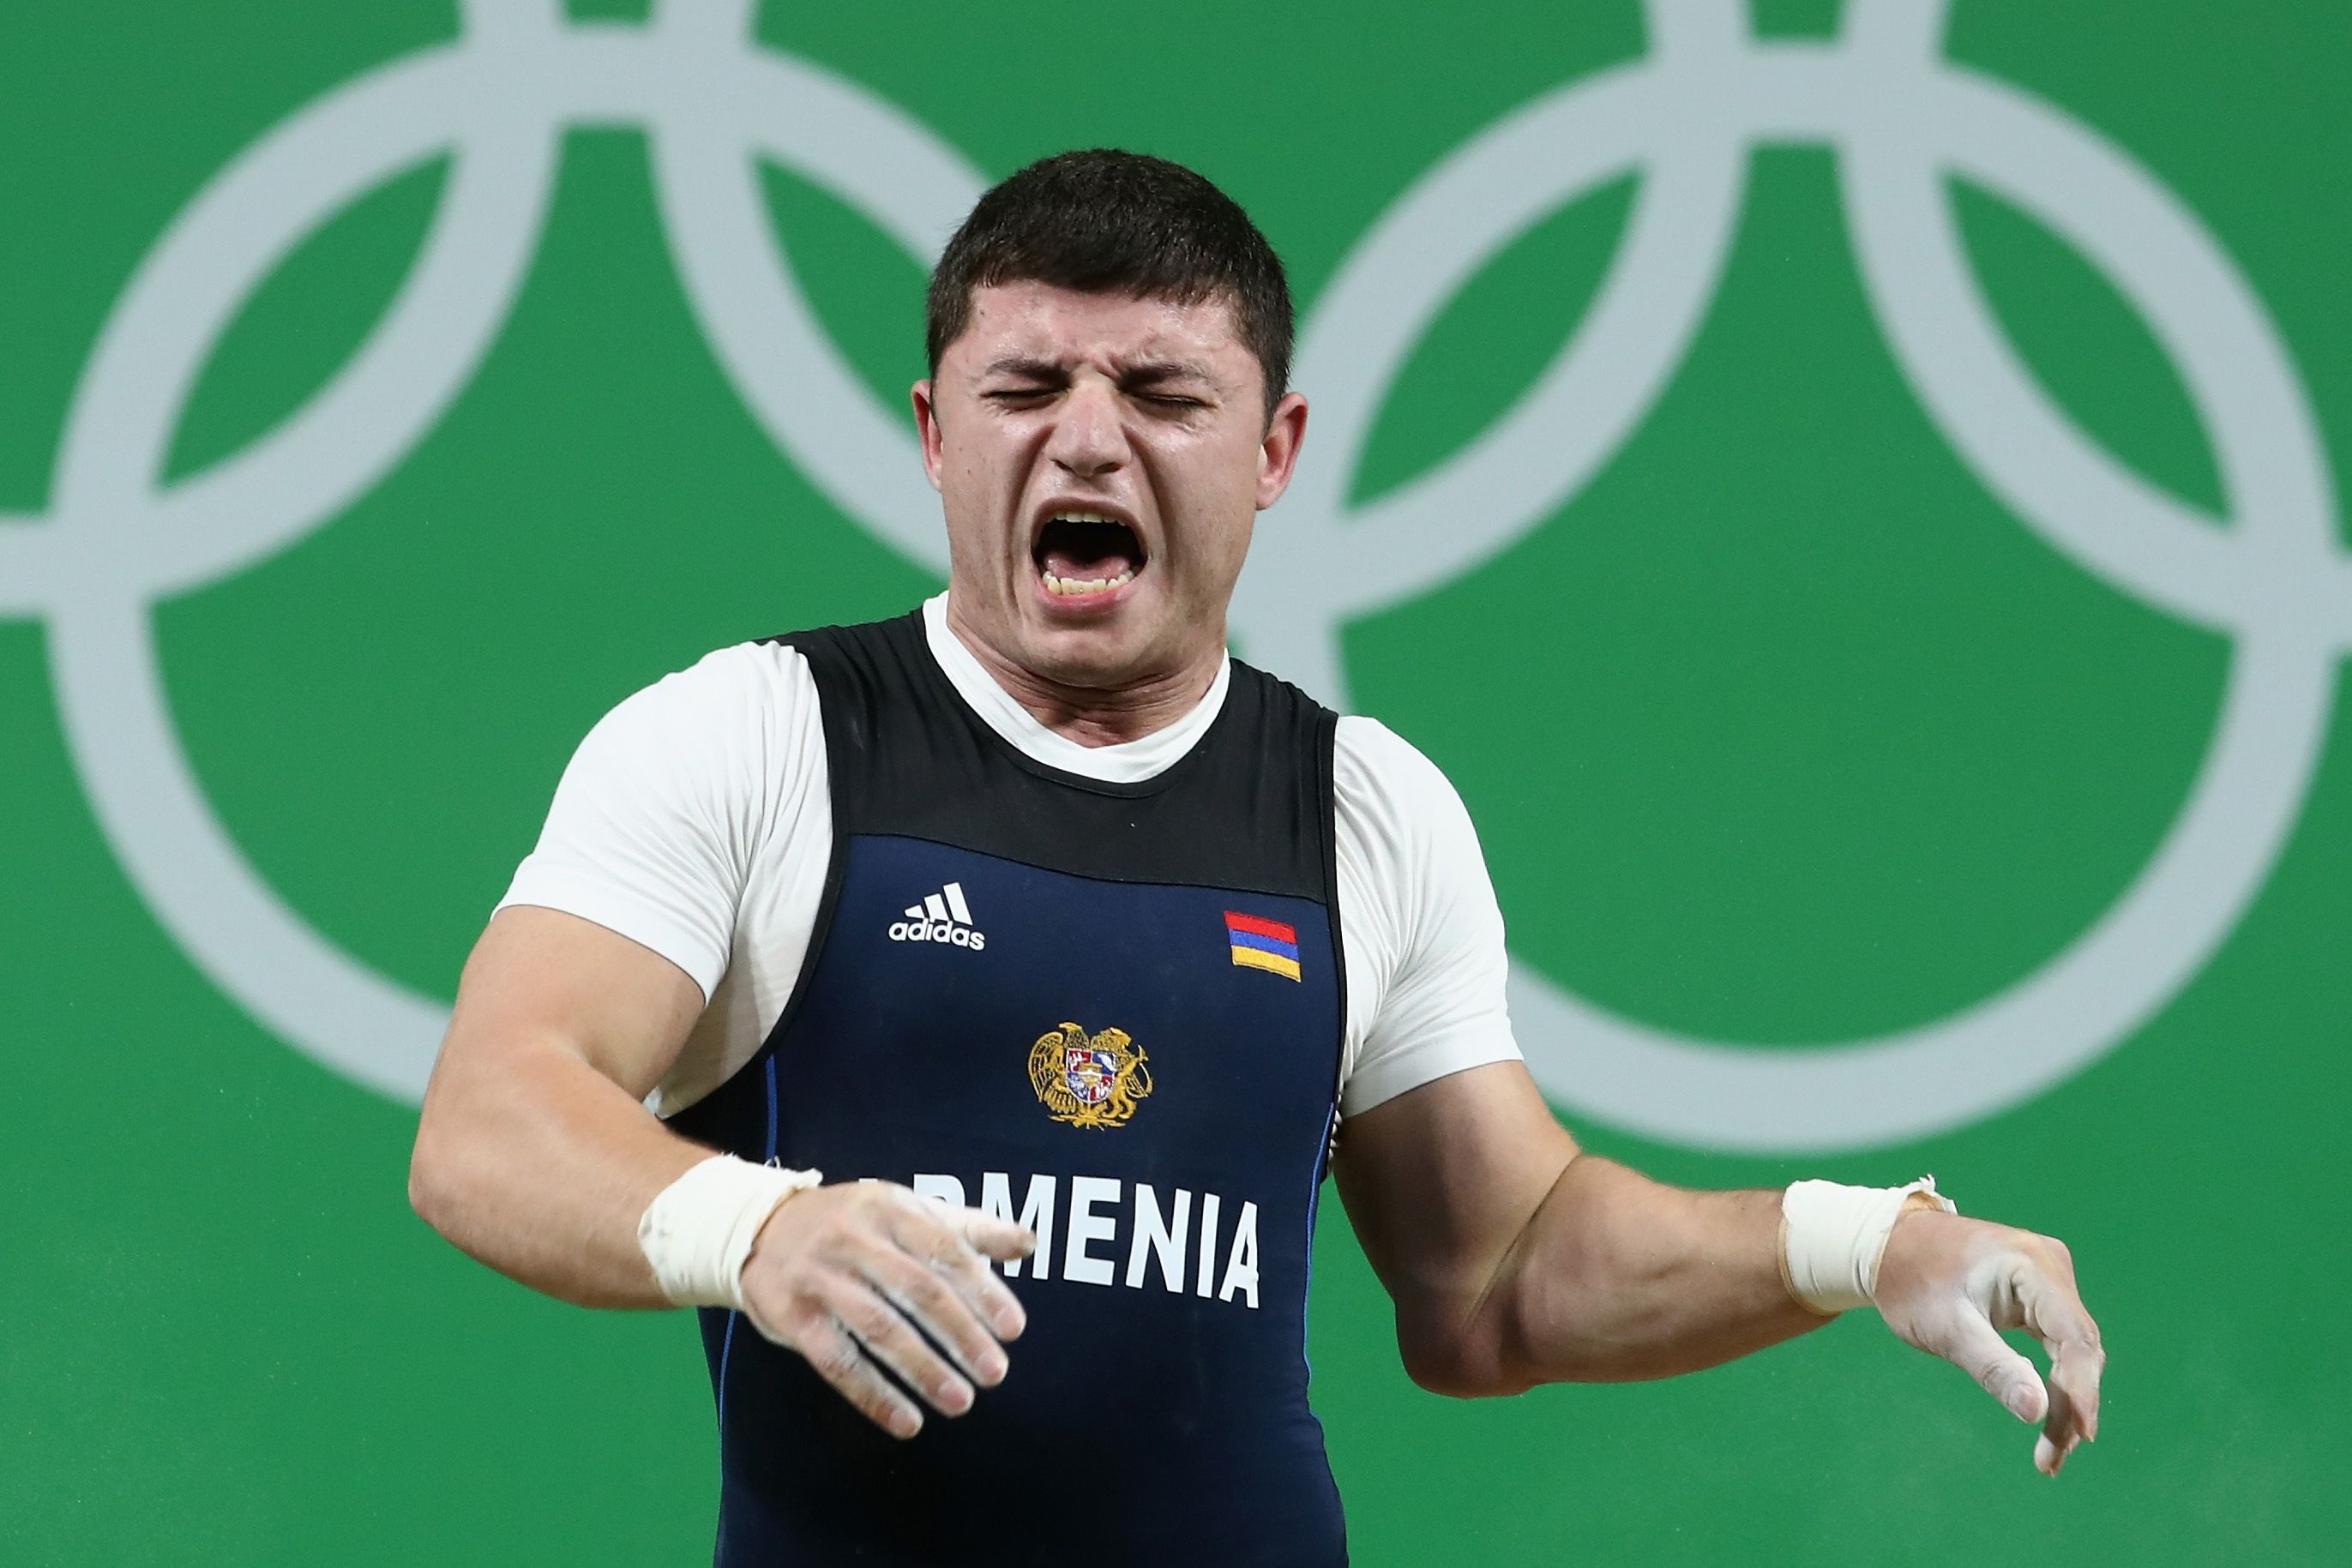 RIO DE JANEIRO, BRAZIL - AUGUST 10: Andranik Karapetyan of Armenia reacts to an injury during the Men's 77kg Group A weightlifting contest on Day 5 of the Rio 2016 Olympic Games at Riocentro - Pavilion 2 on August 10, 2016 in Rio de Janeiro, Brazil. (Photo by Julian Finney/Getty Images)